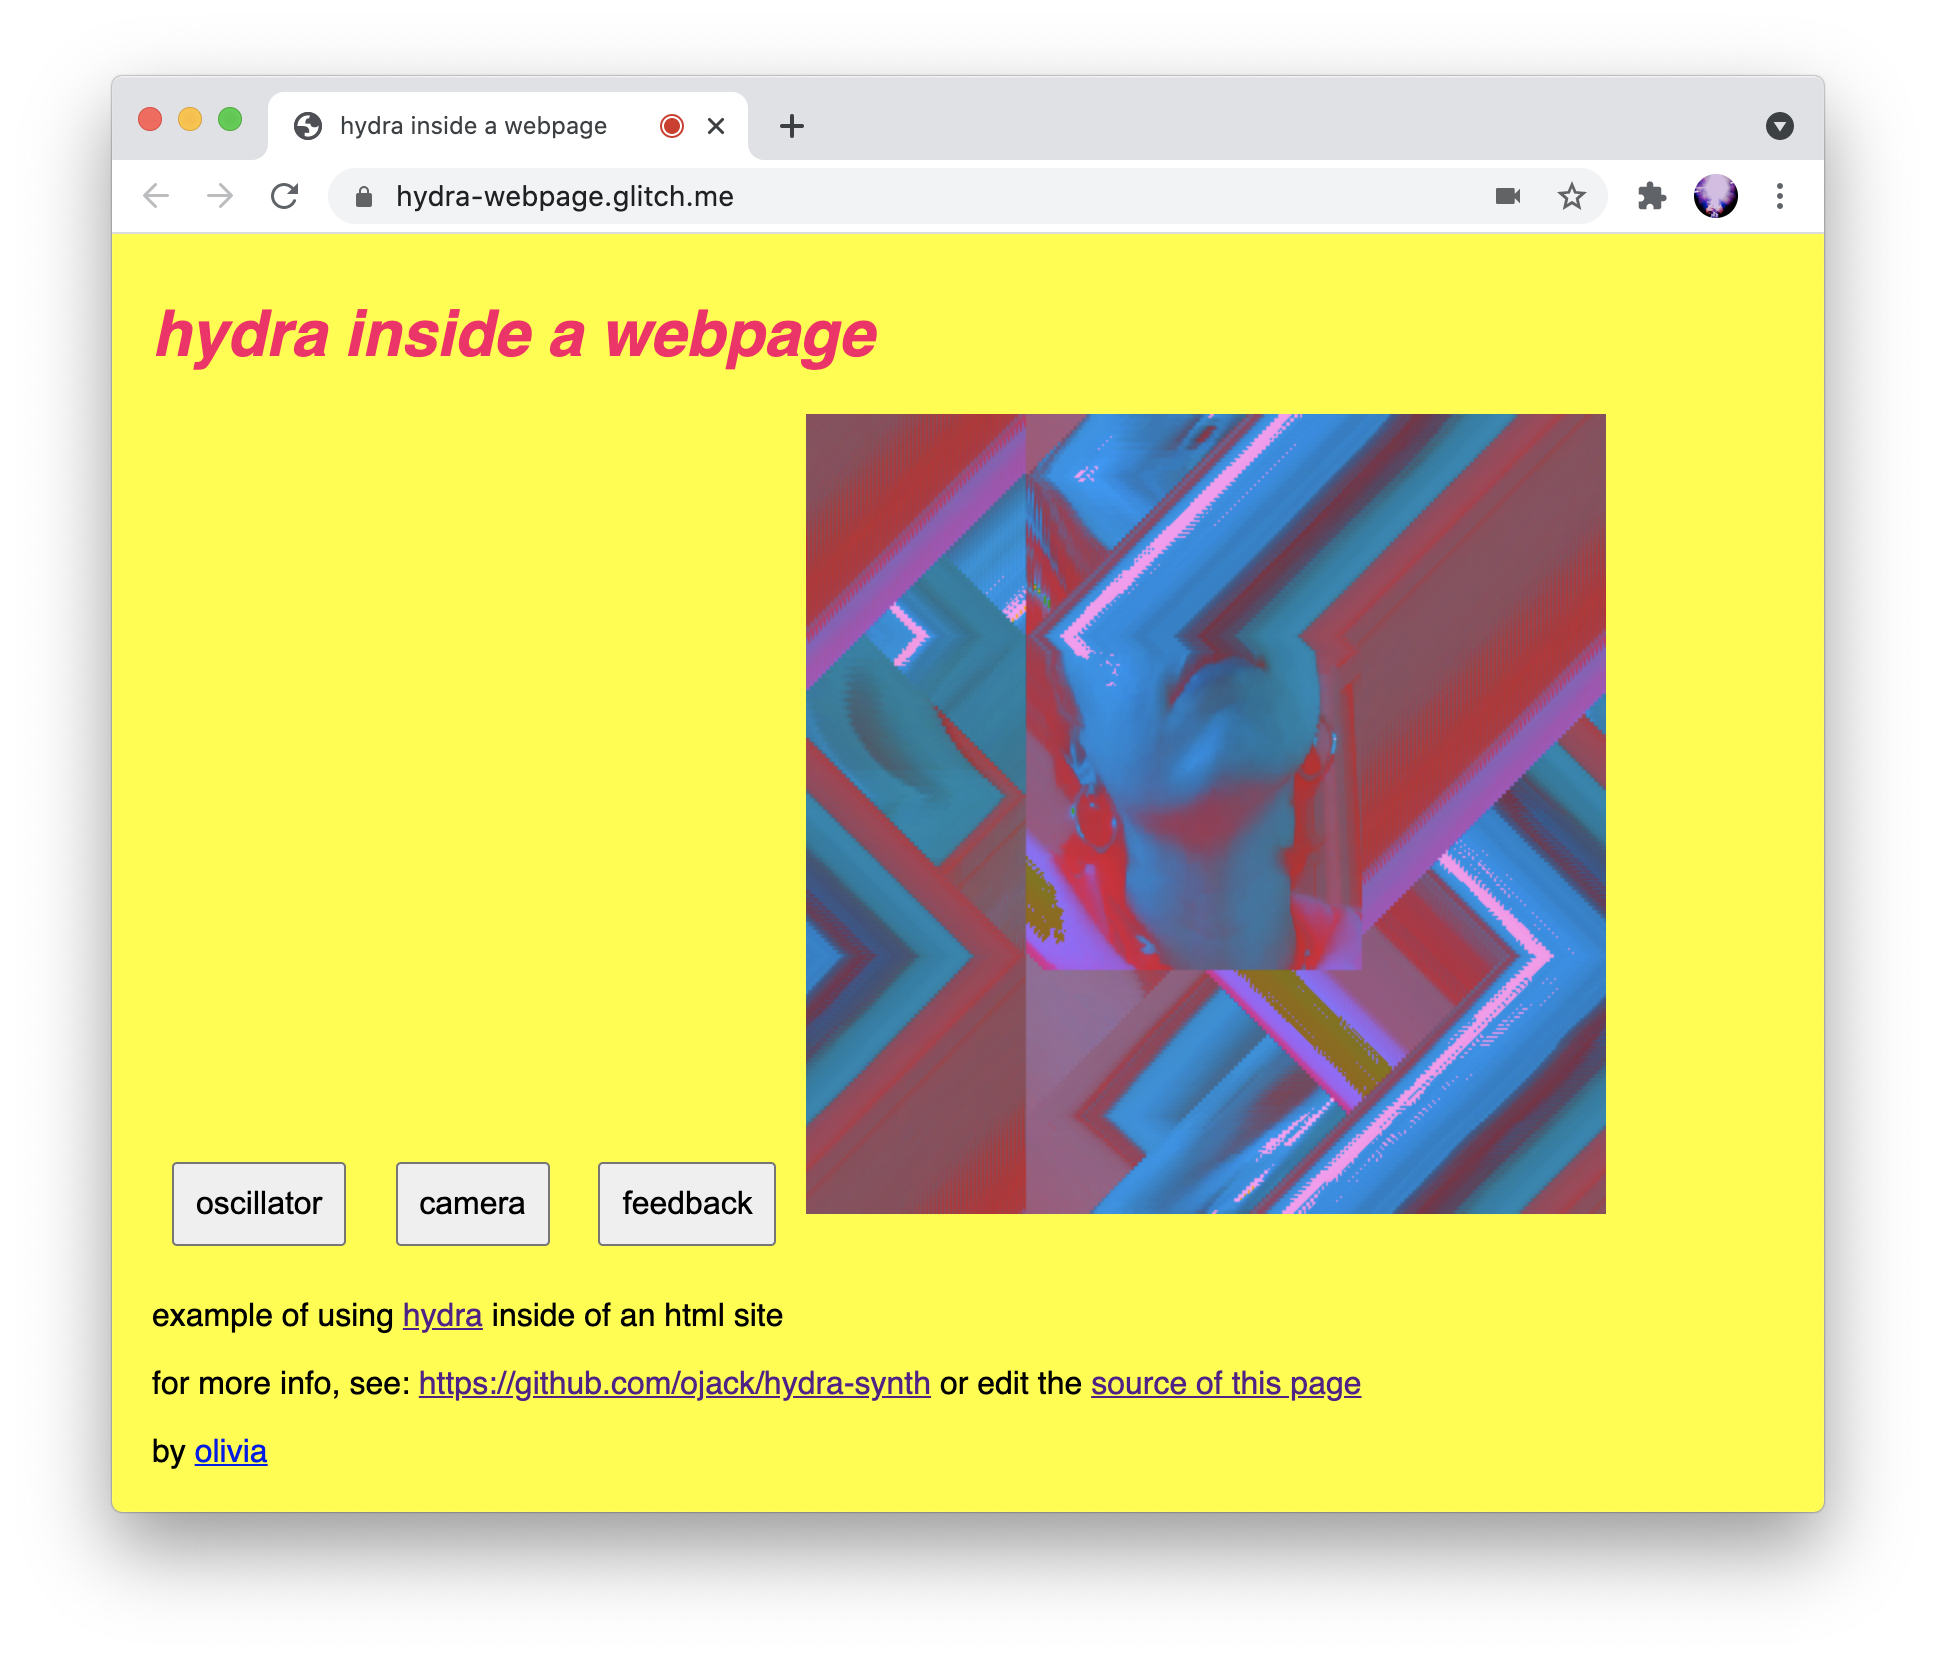 image of hydra in webpage